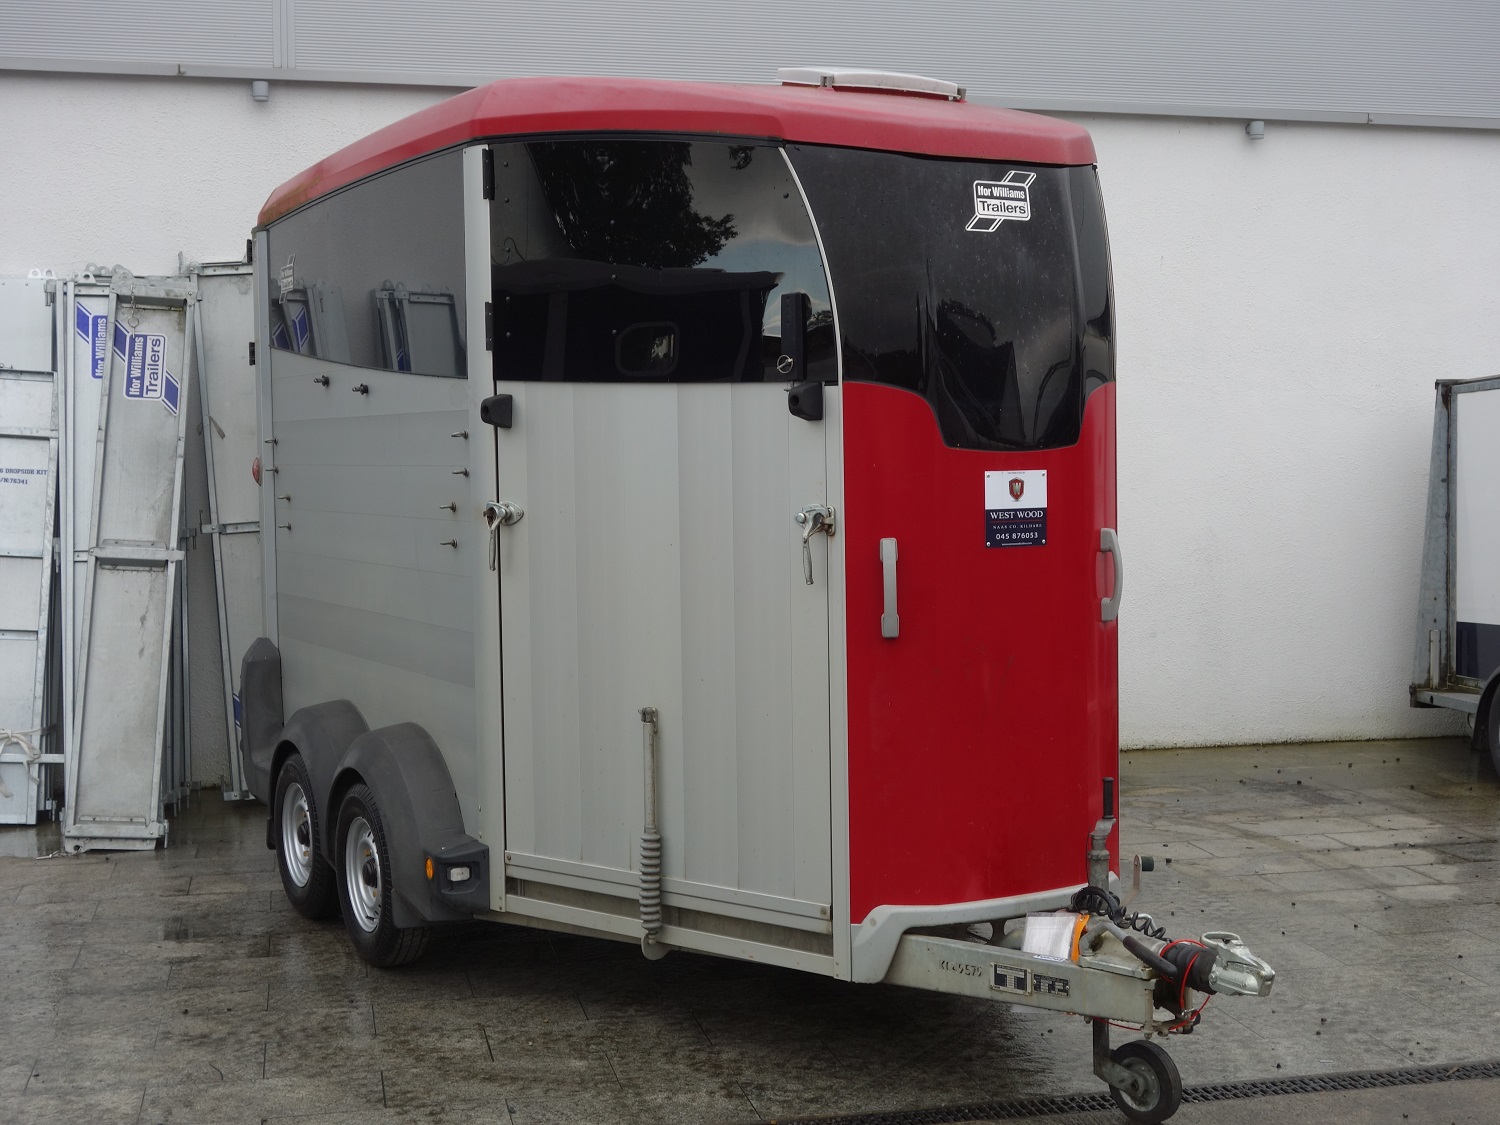 T09202: Used Year 2018 HBX511 Horsebox with Wheel Trims